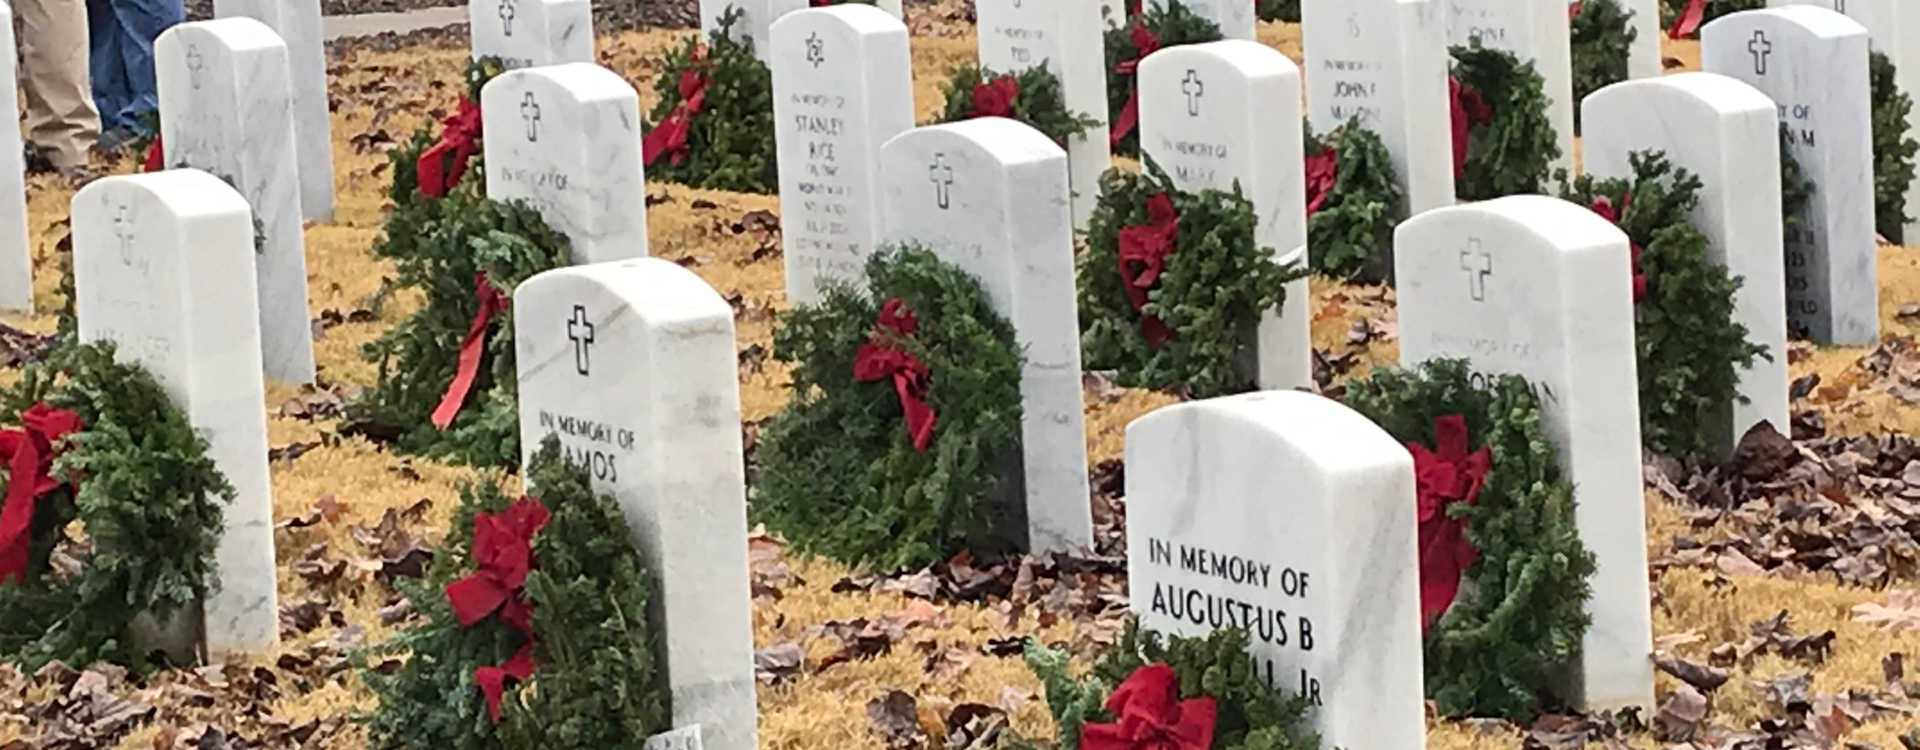 Wreaths Across America - wreaths on all grave site markers